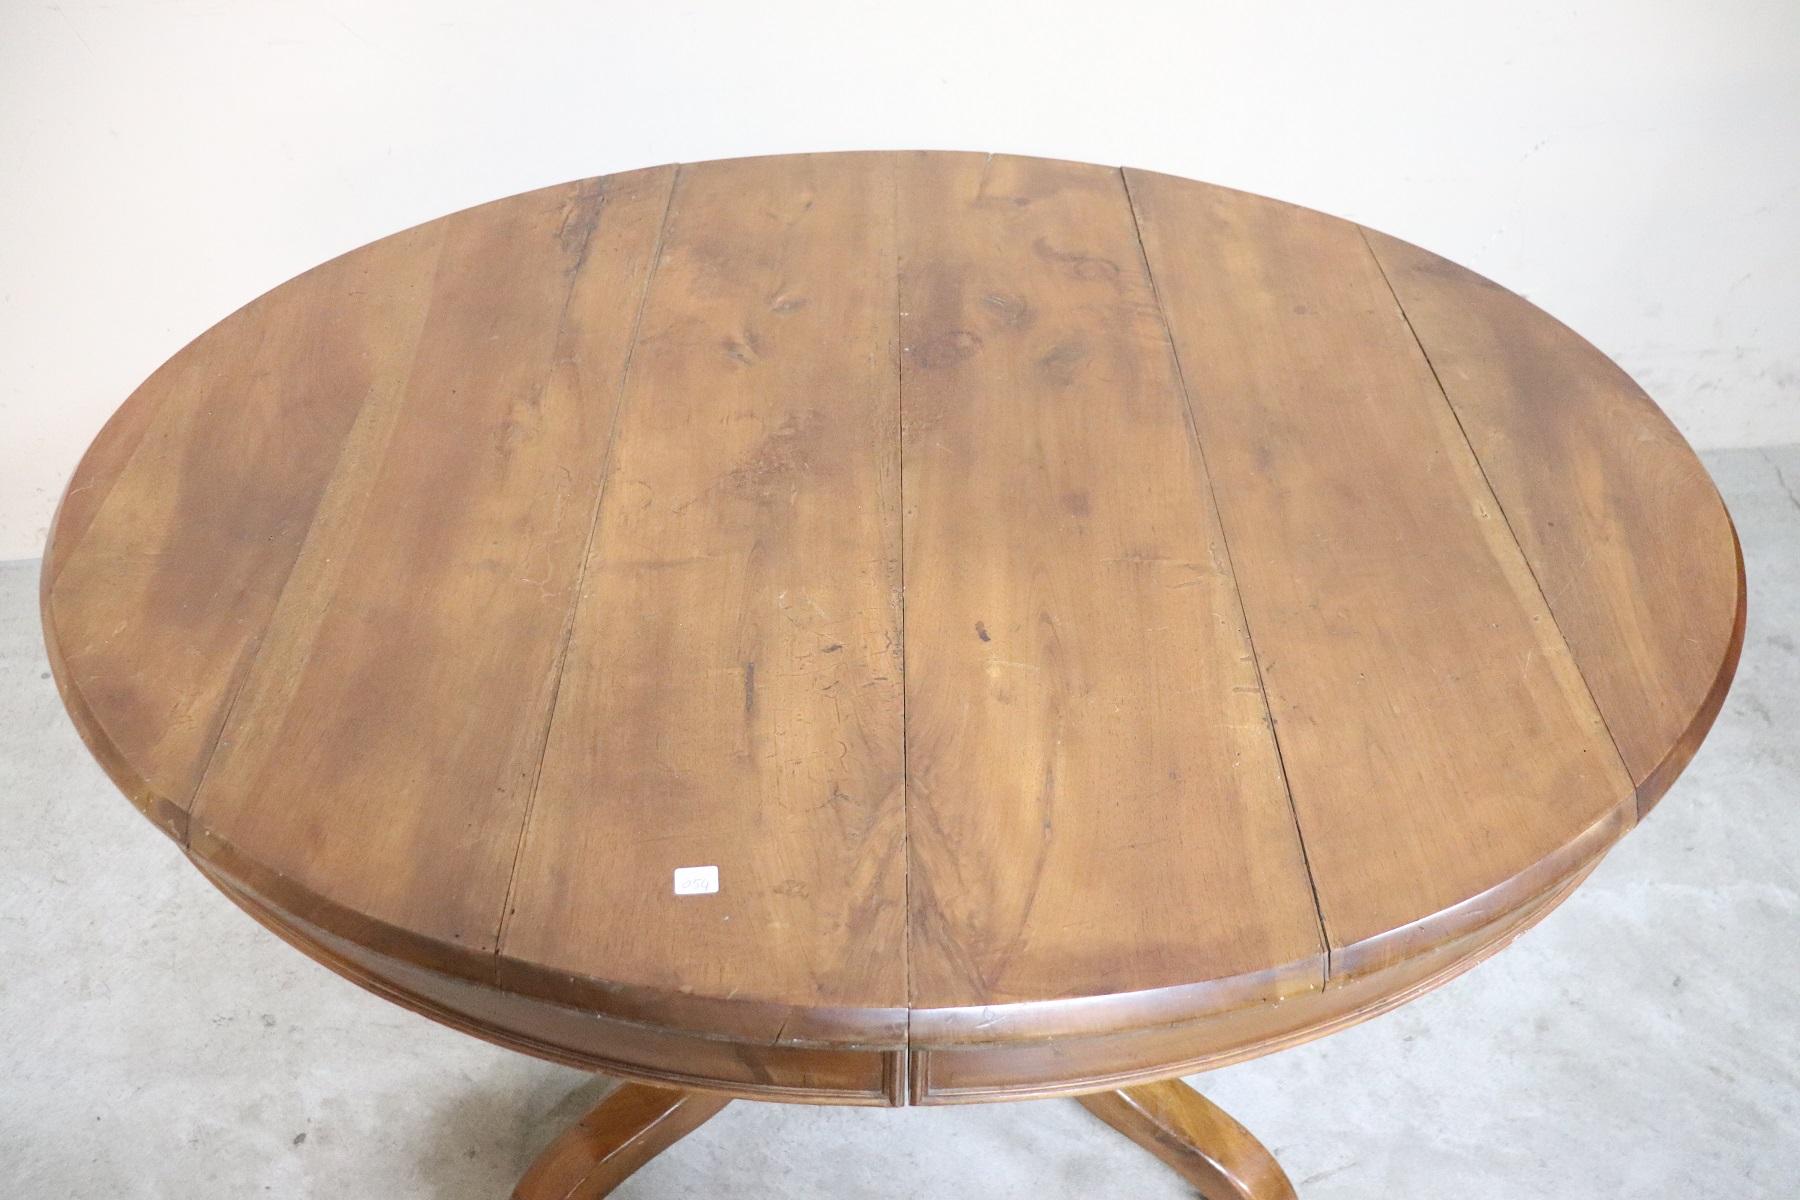 Beautiful important antique oval dining room table, 1850s in walnut. This table is perfect for a dining room, it extends into the center becoming a large table that can accommodate many people. The four legs are in solid walnut wood. The original